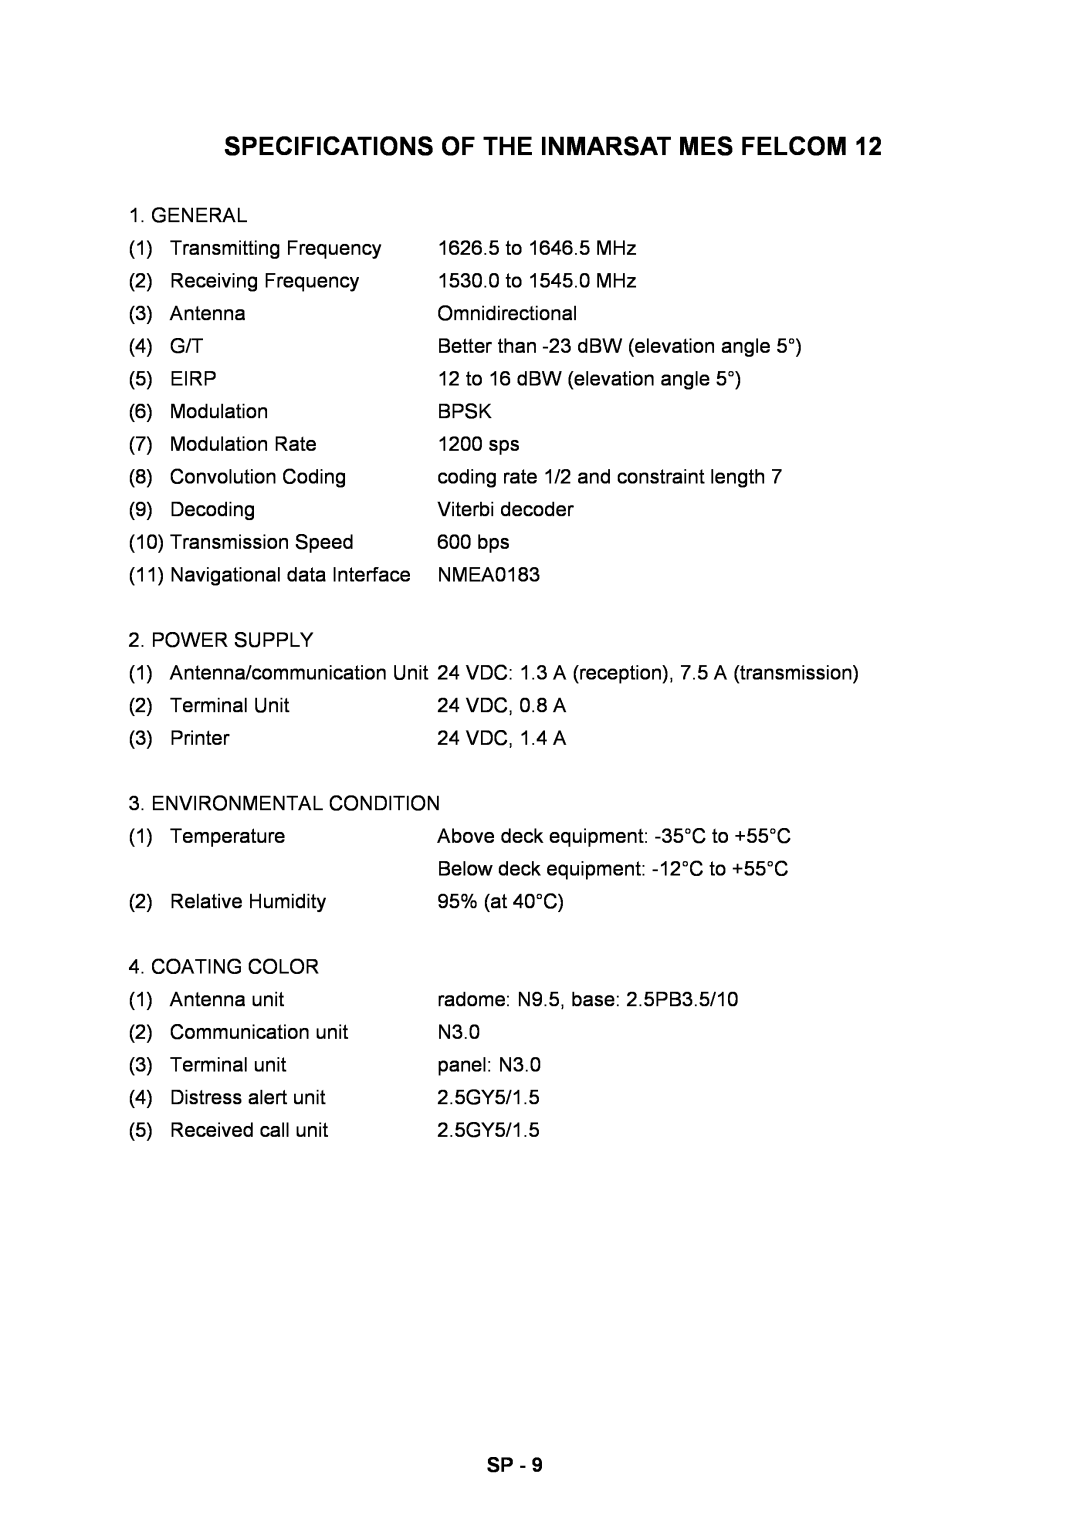 Furuno RC-1500-1T manual Specifications Of The Inmarsat Mes Felcom 